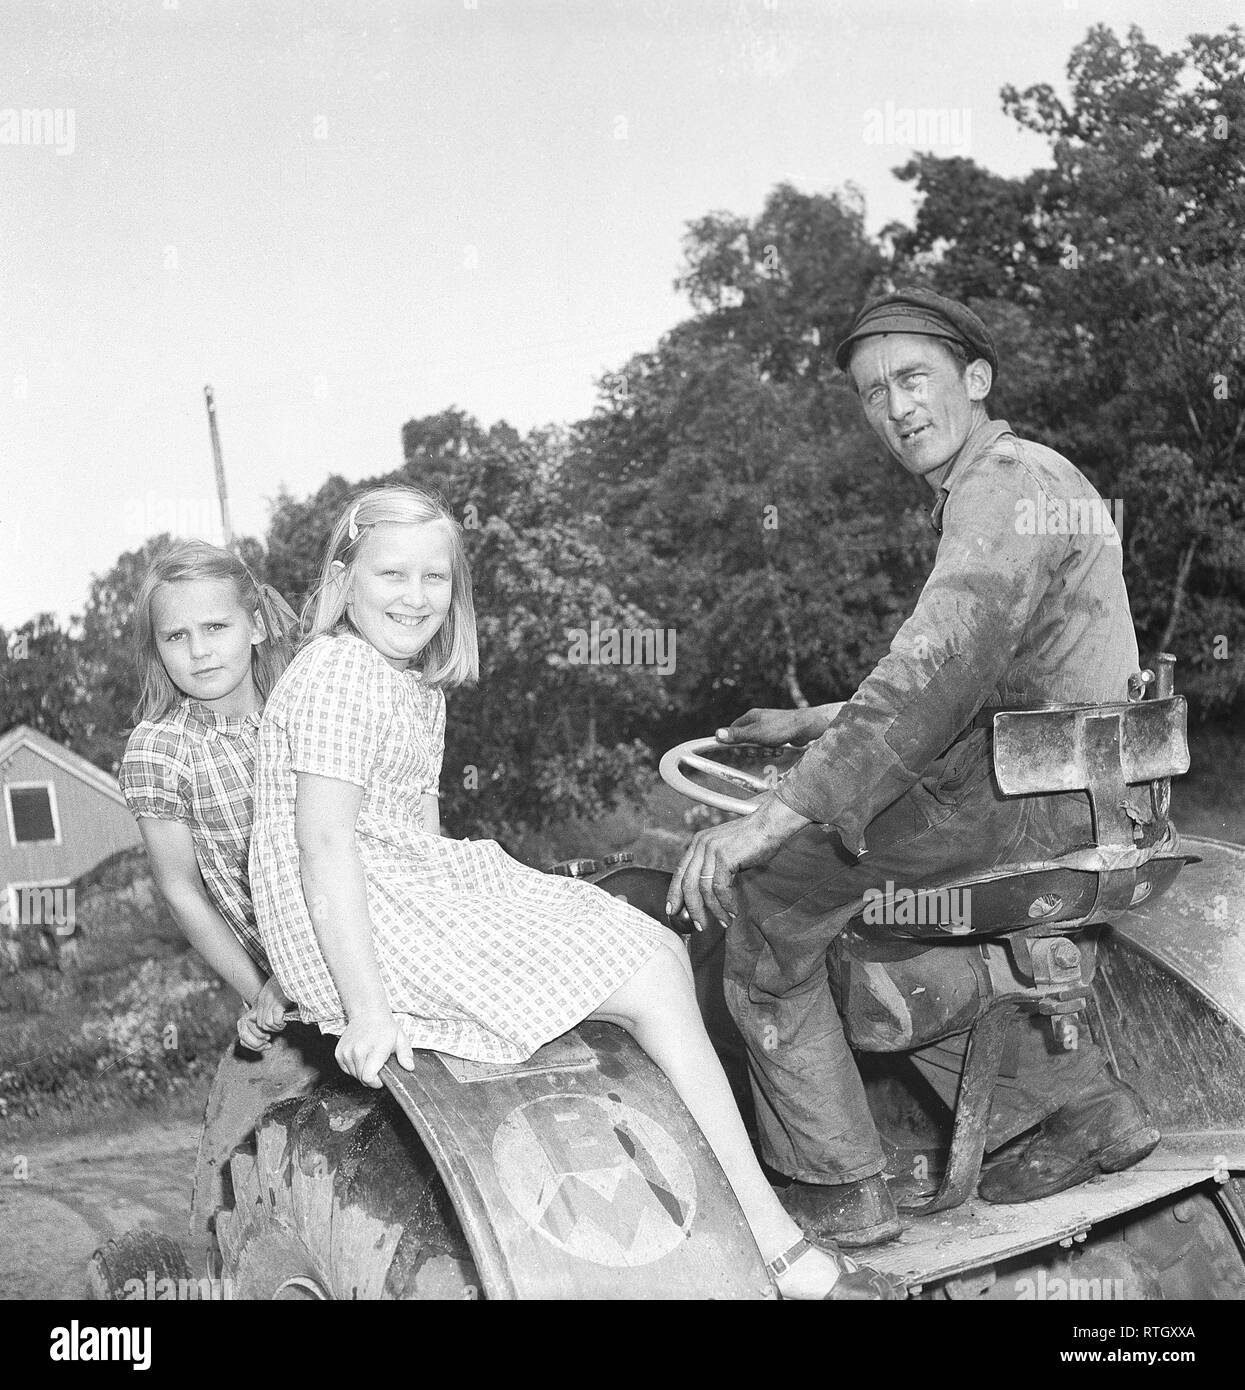 Summer in the 1940s. Two girls in summer dresses are enjoying the summer  day in the country. Perhaps on a summer holiday in the countryside where  they enjoy riding on the tractor.